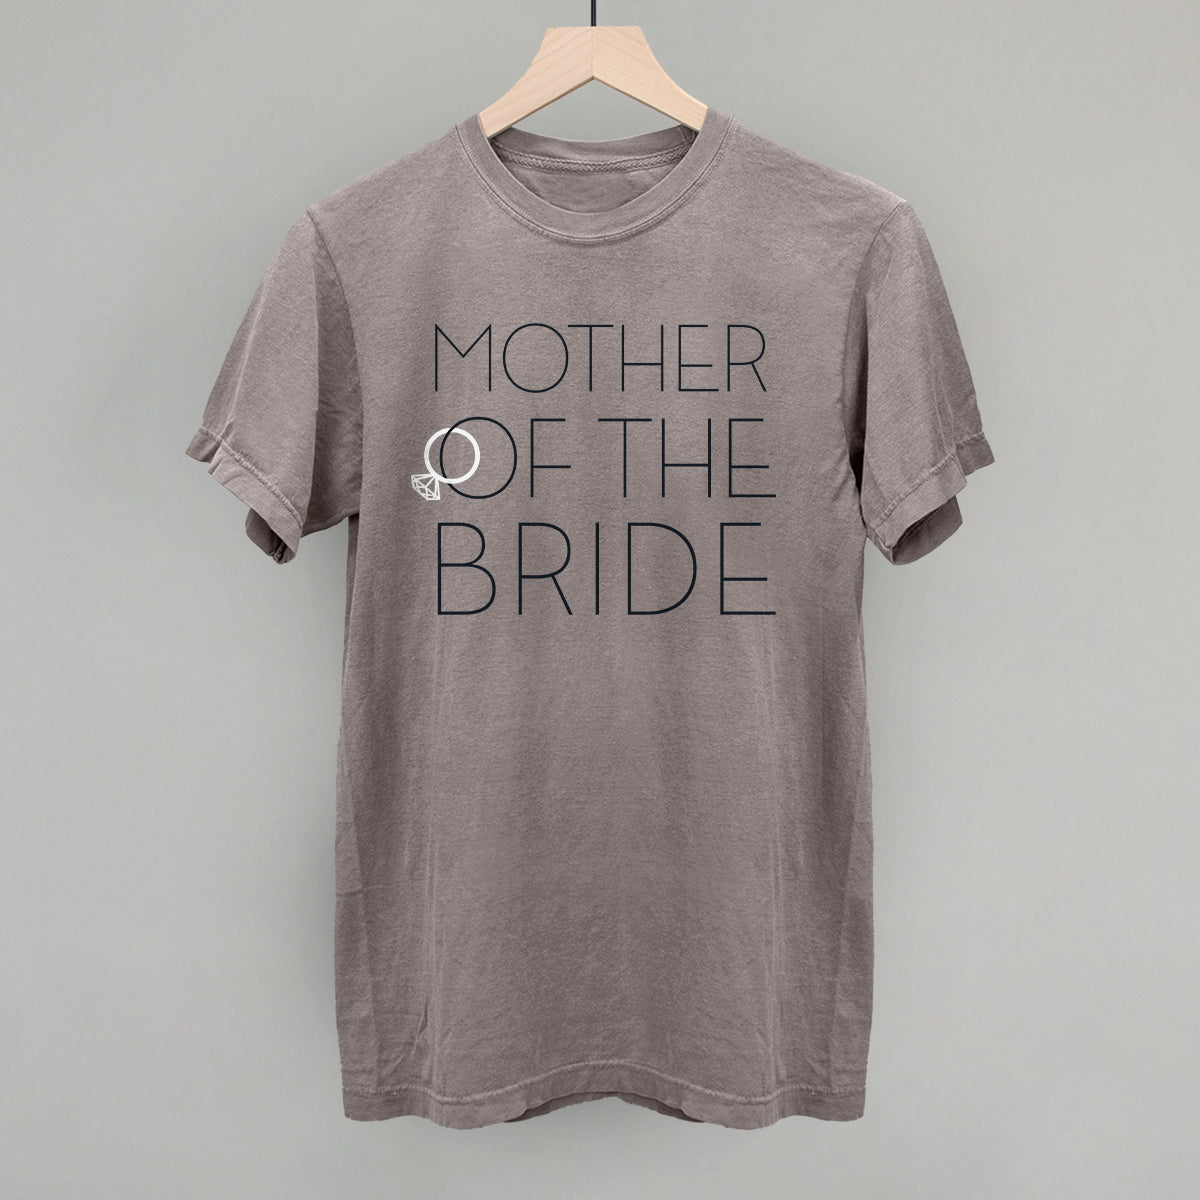 Mother of the Bride (Deco Ring)